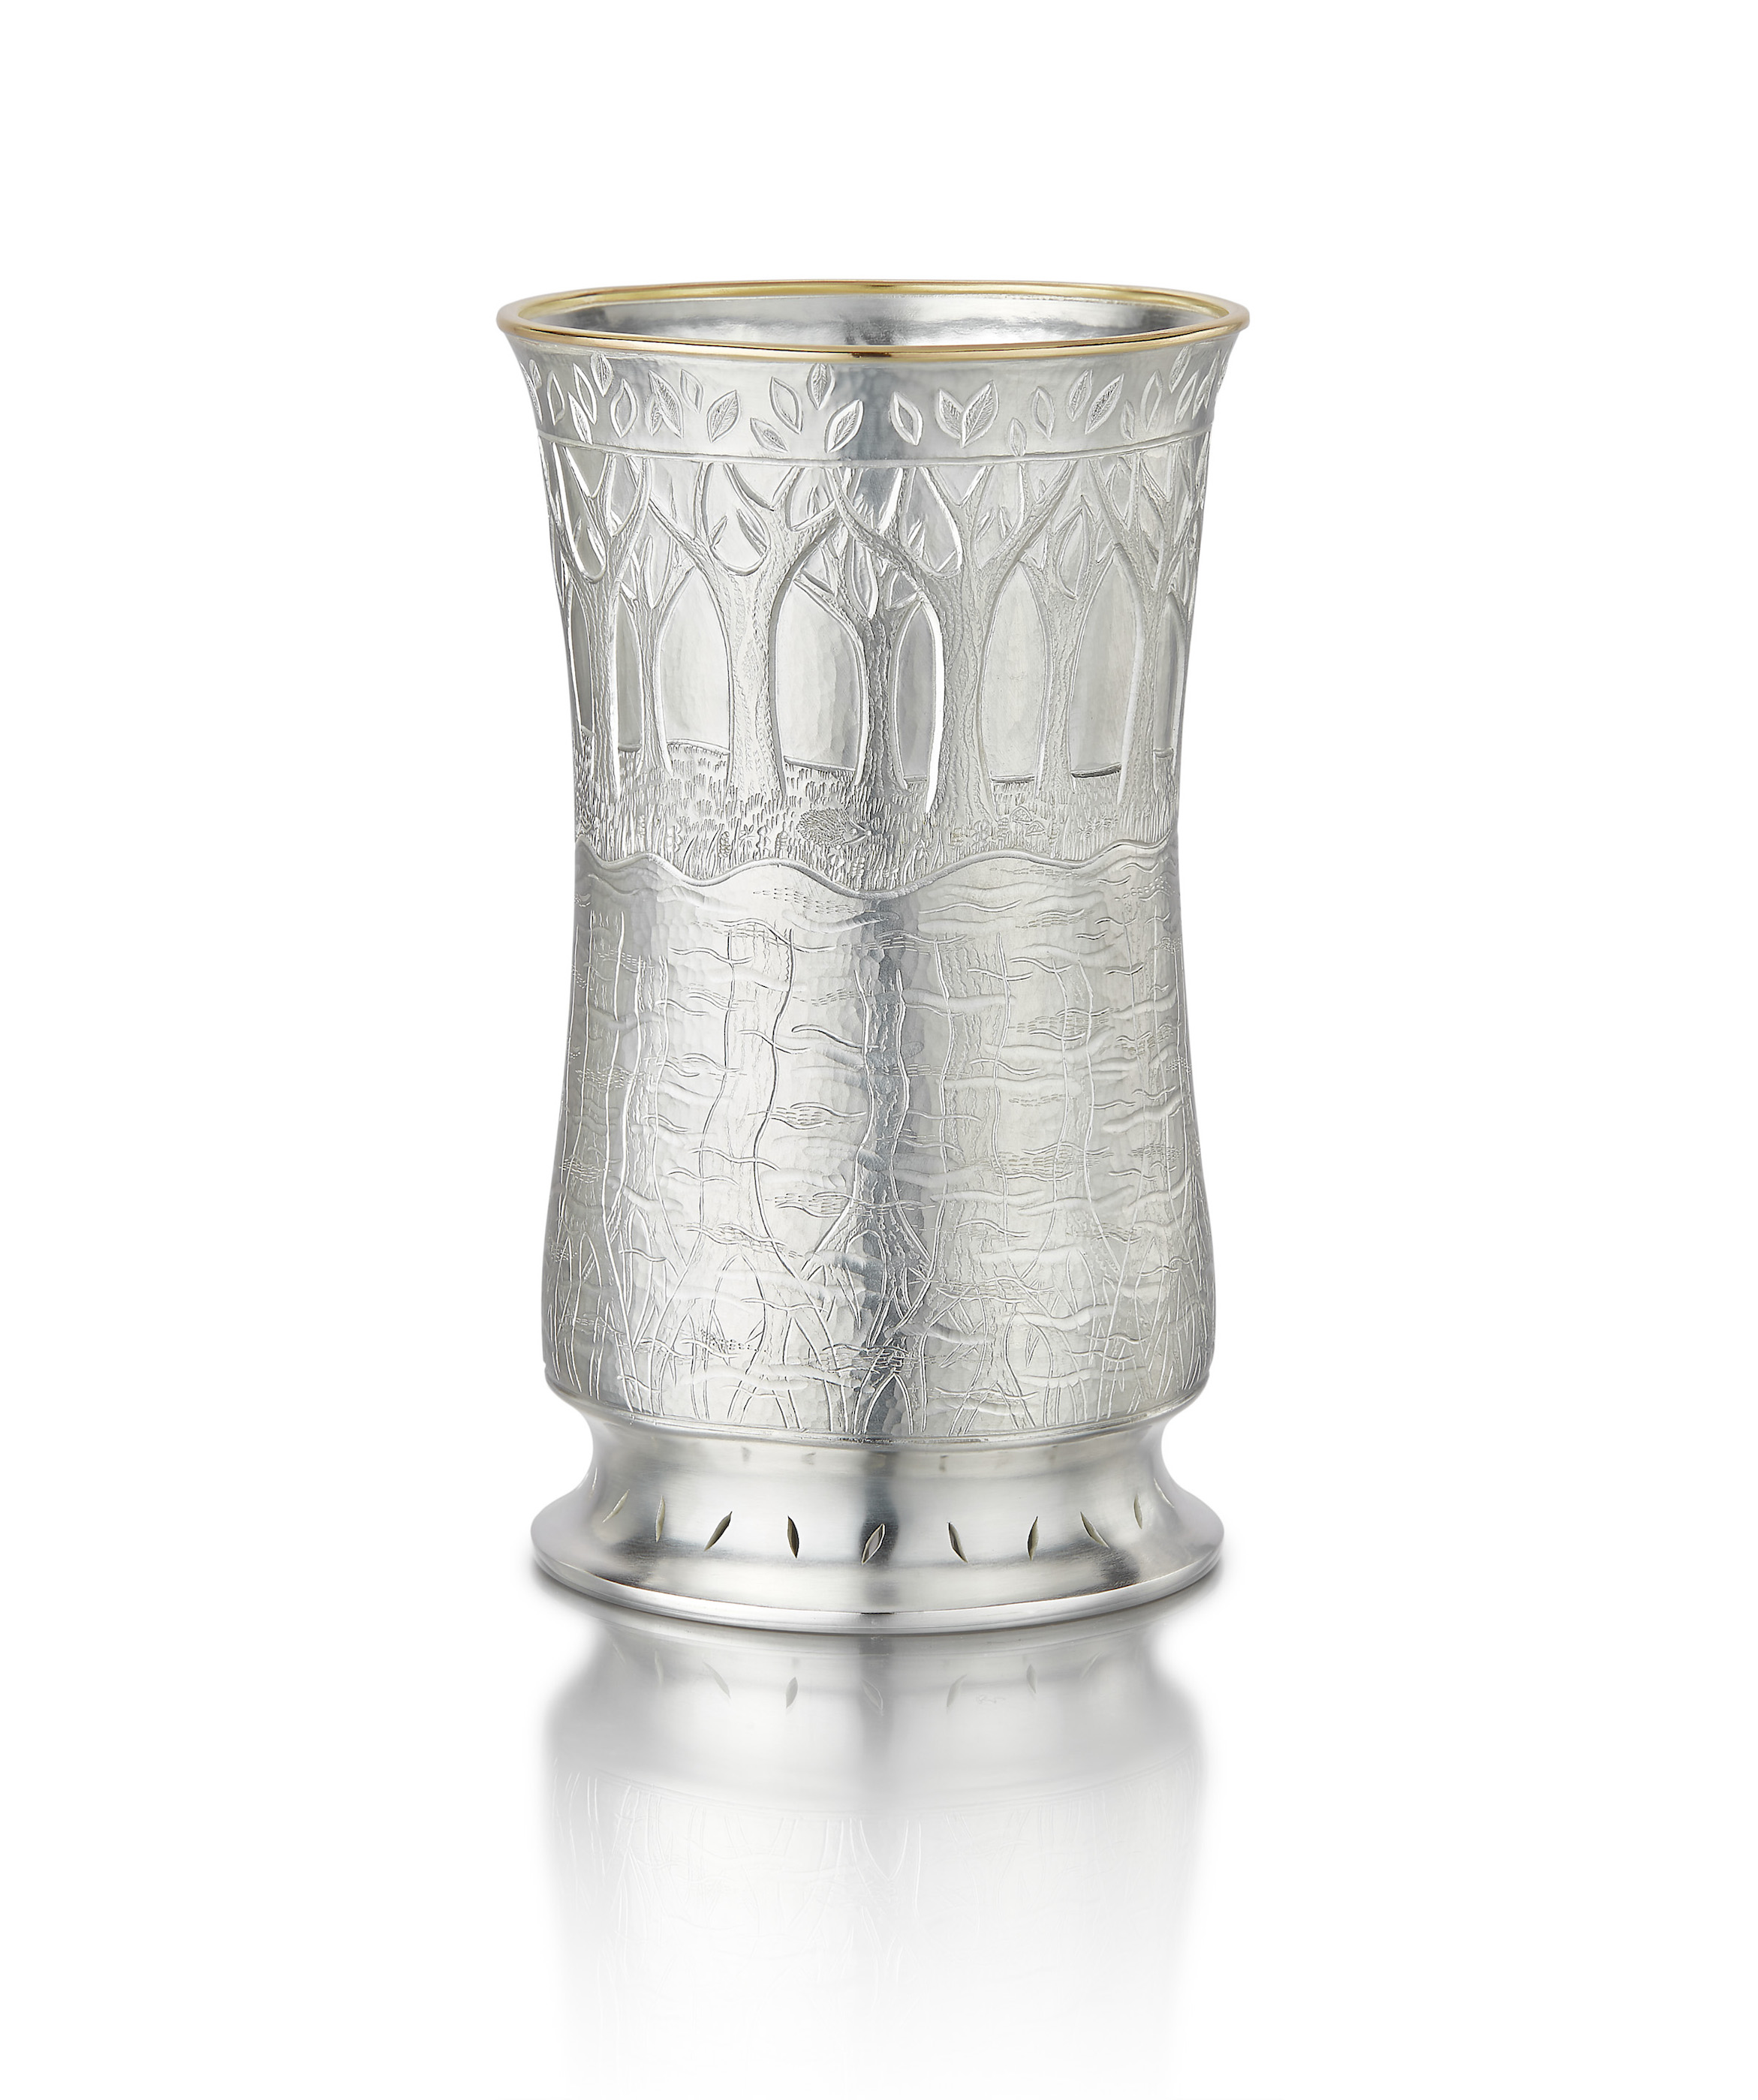 'Woodland Reflections' Goblet